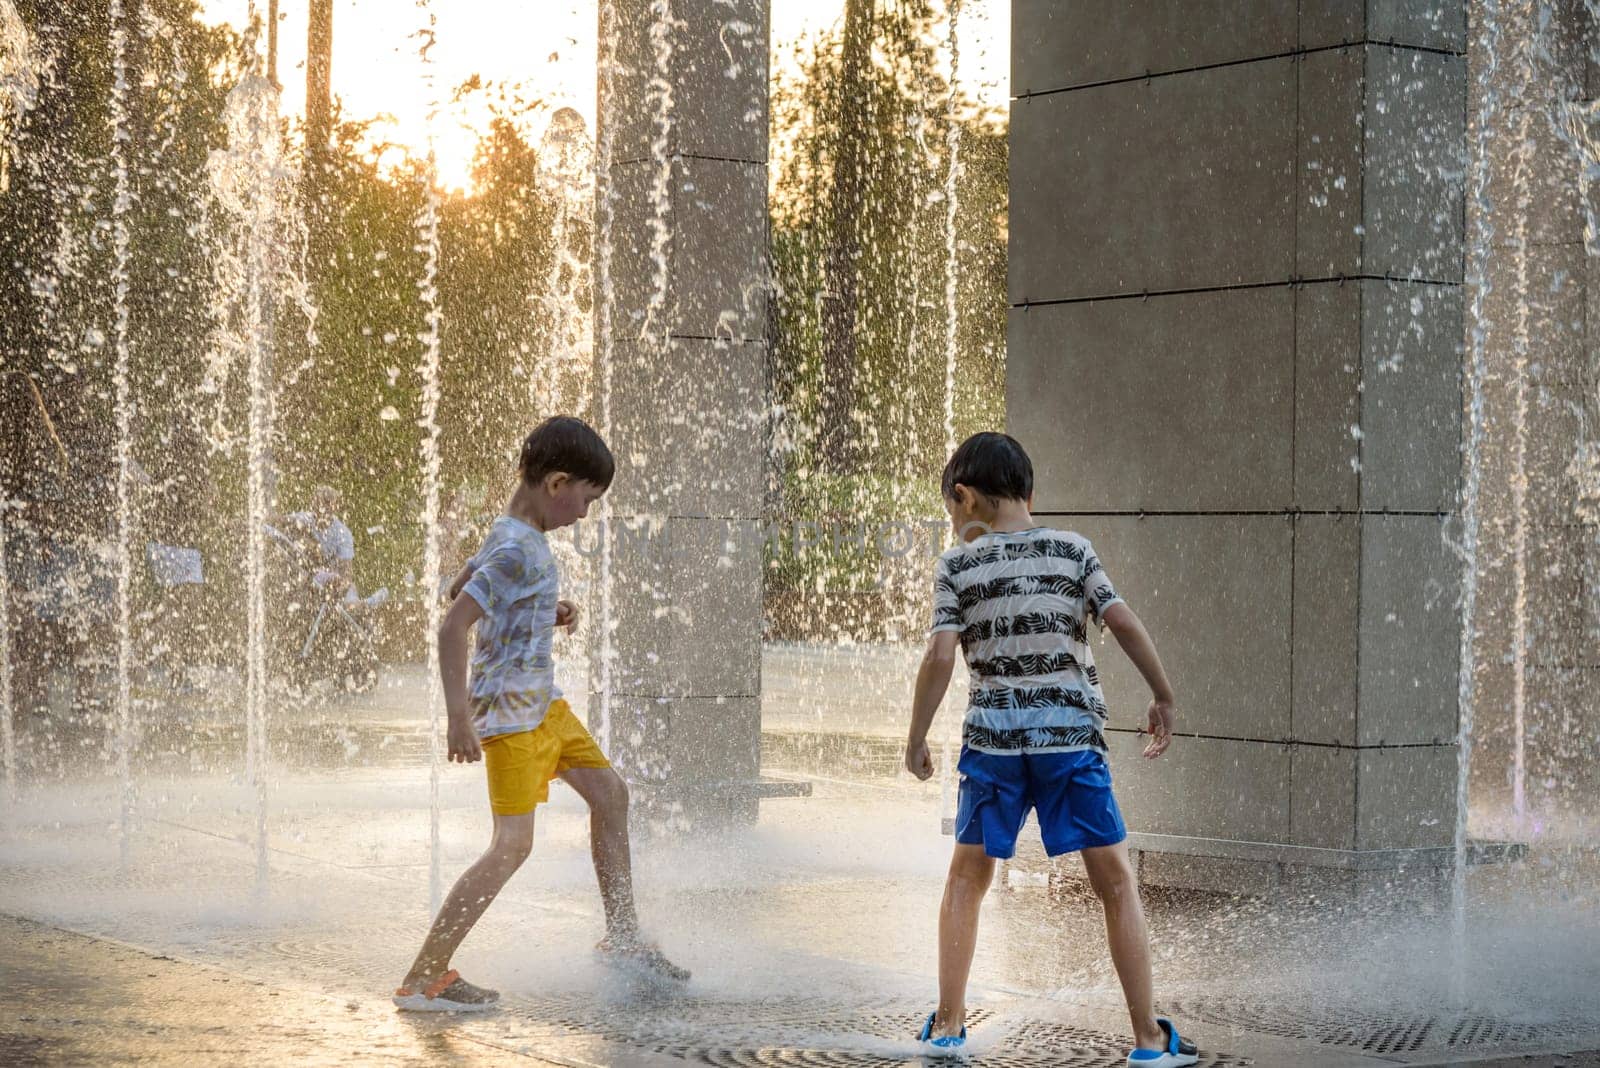 Boys jumping in water fountains. Children playing with a city fo by Kobysh